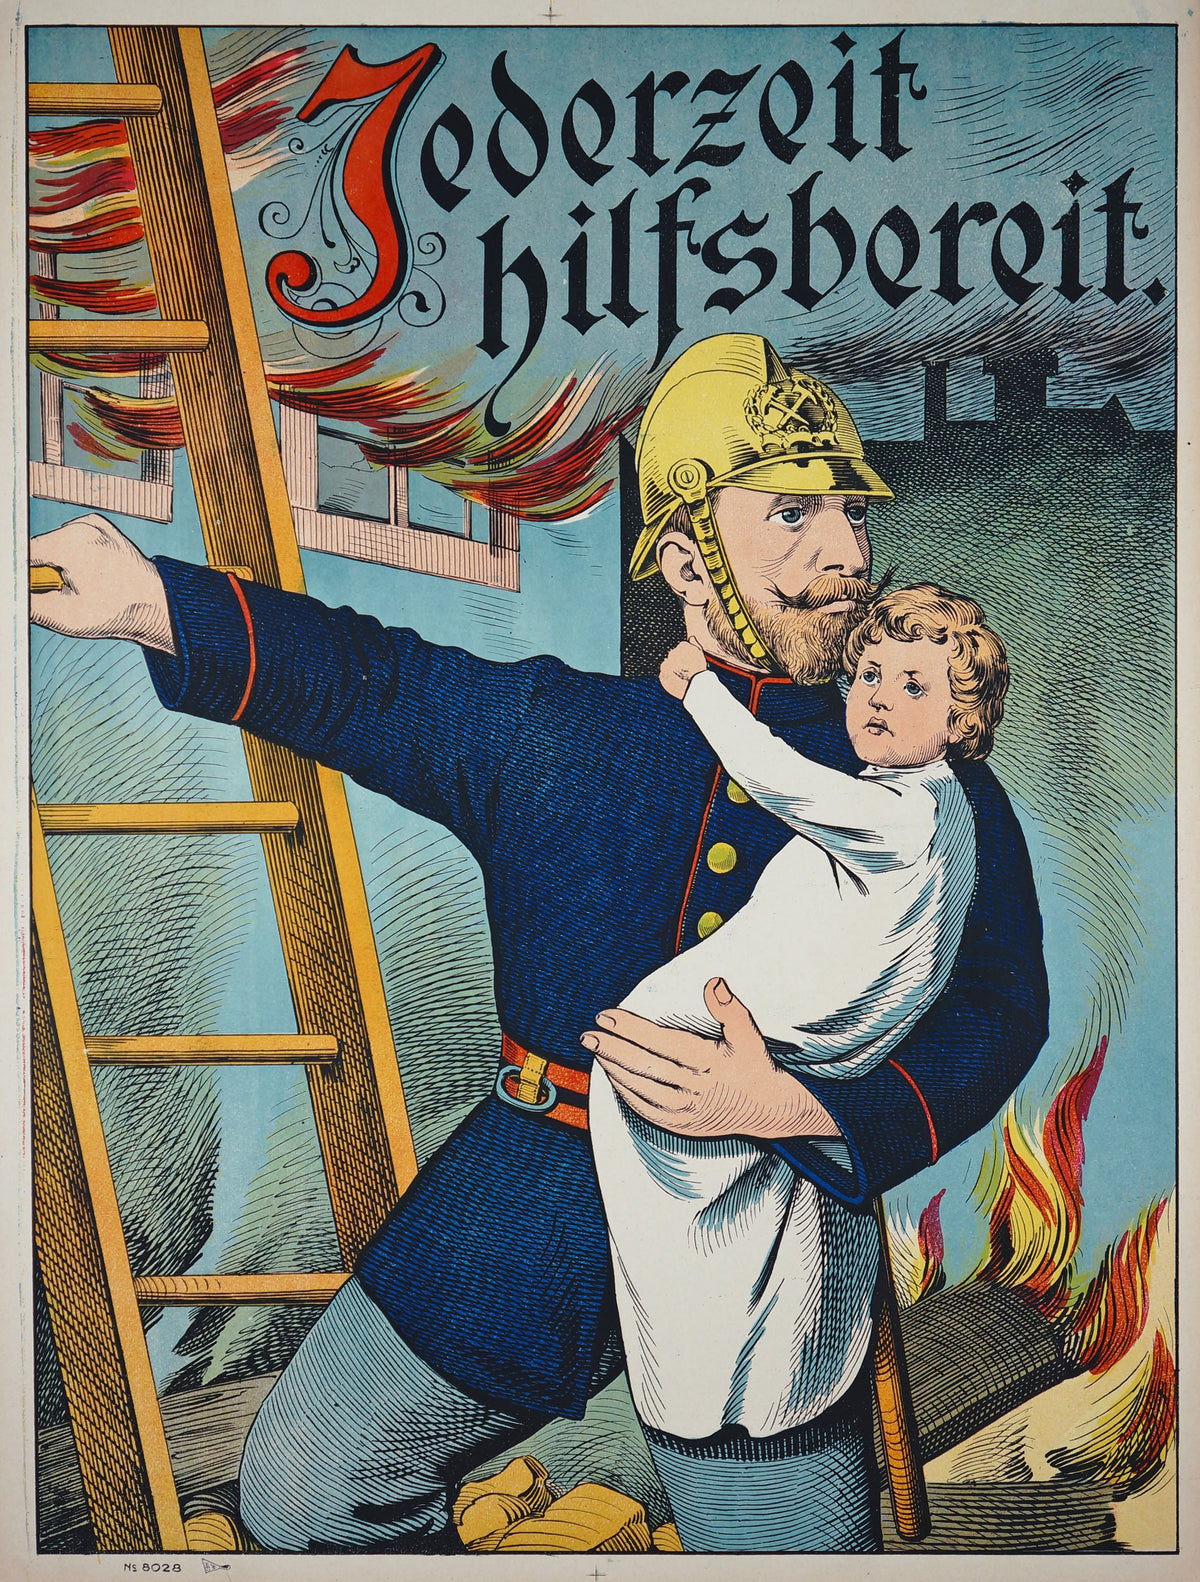 Wissembourg Pompier (Firefighter) no. 8028 - Authentic Vintage Poster